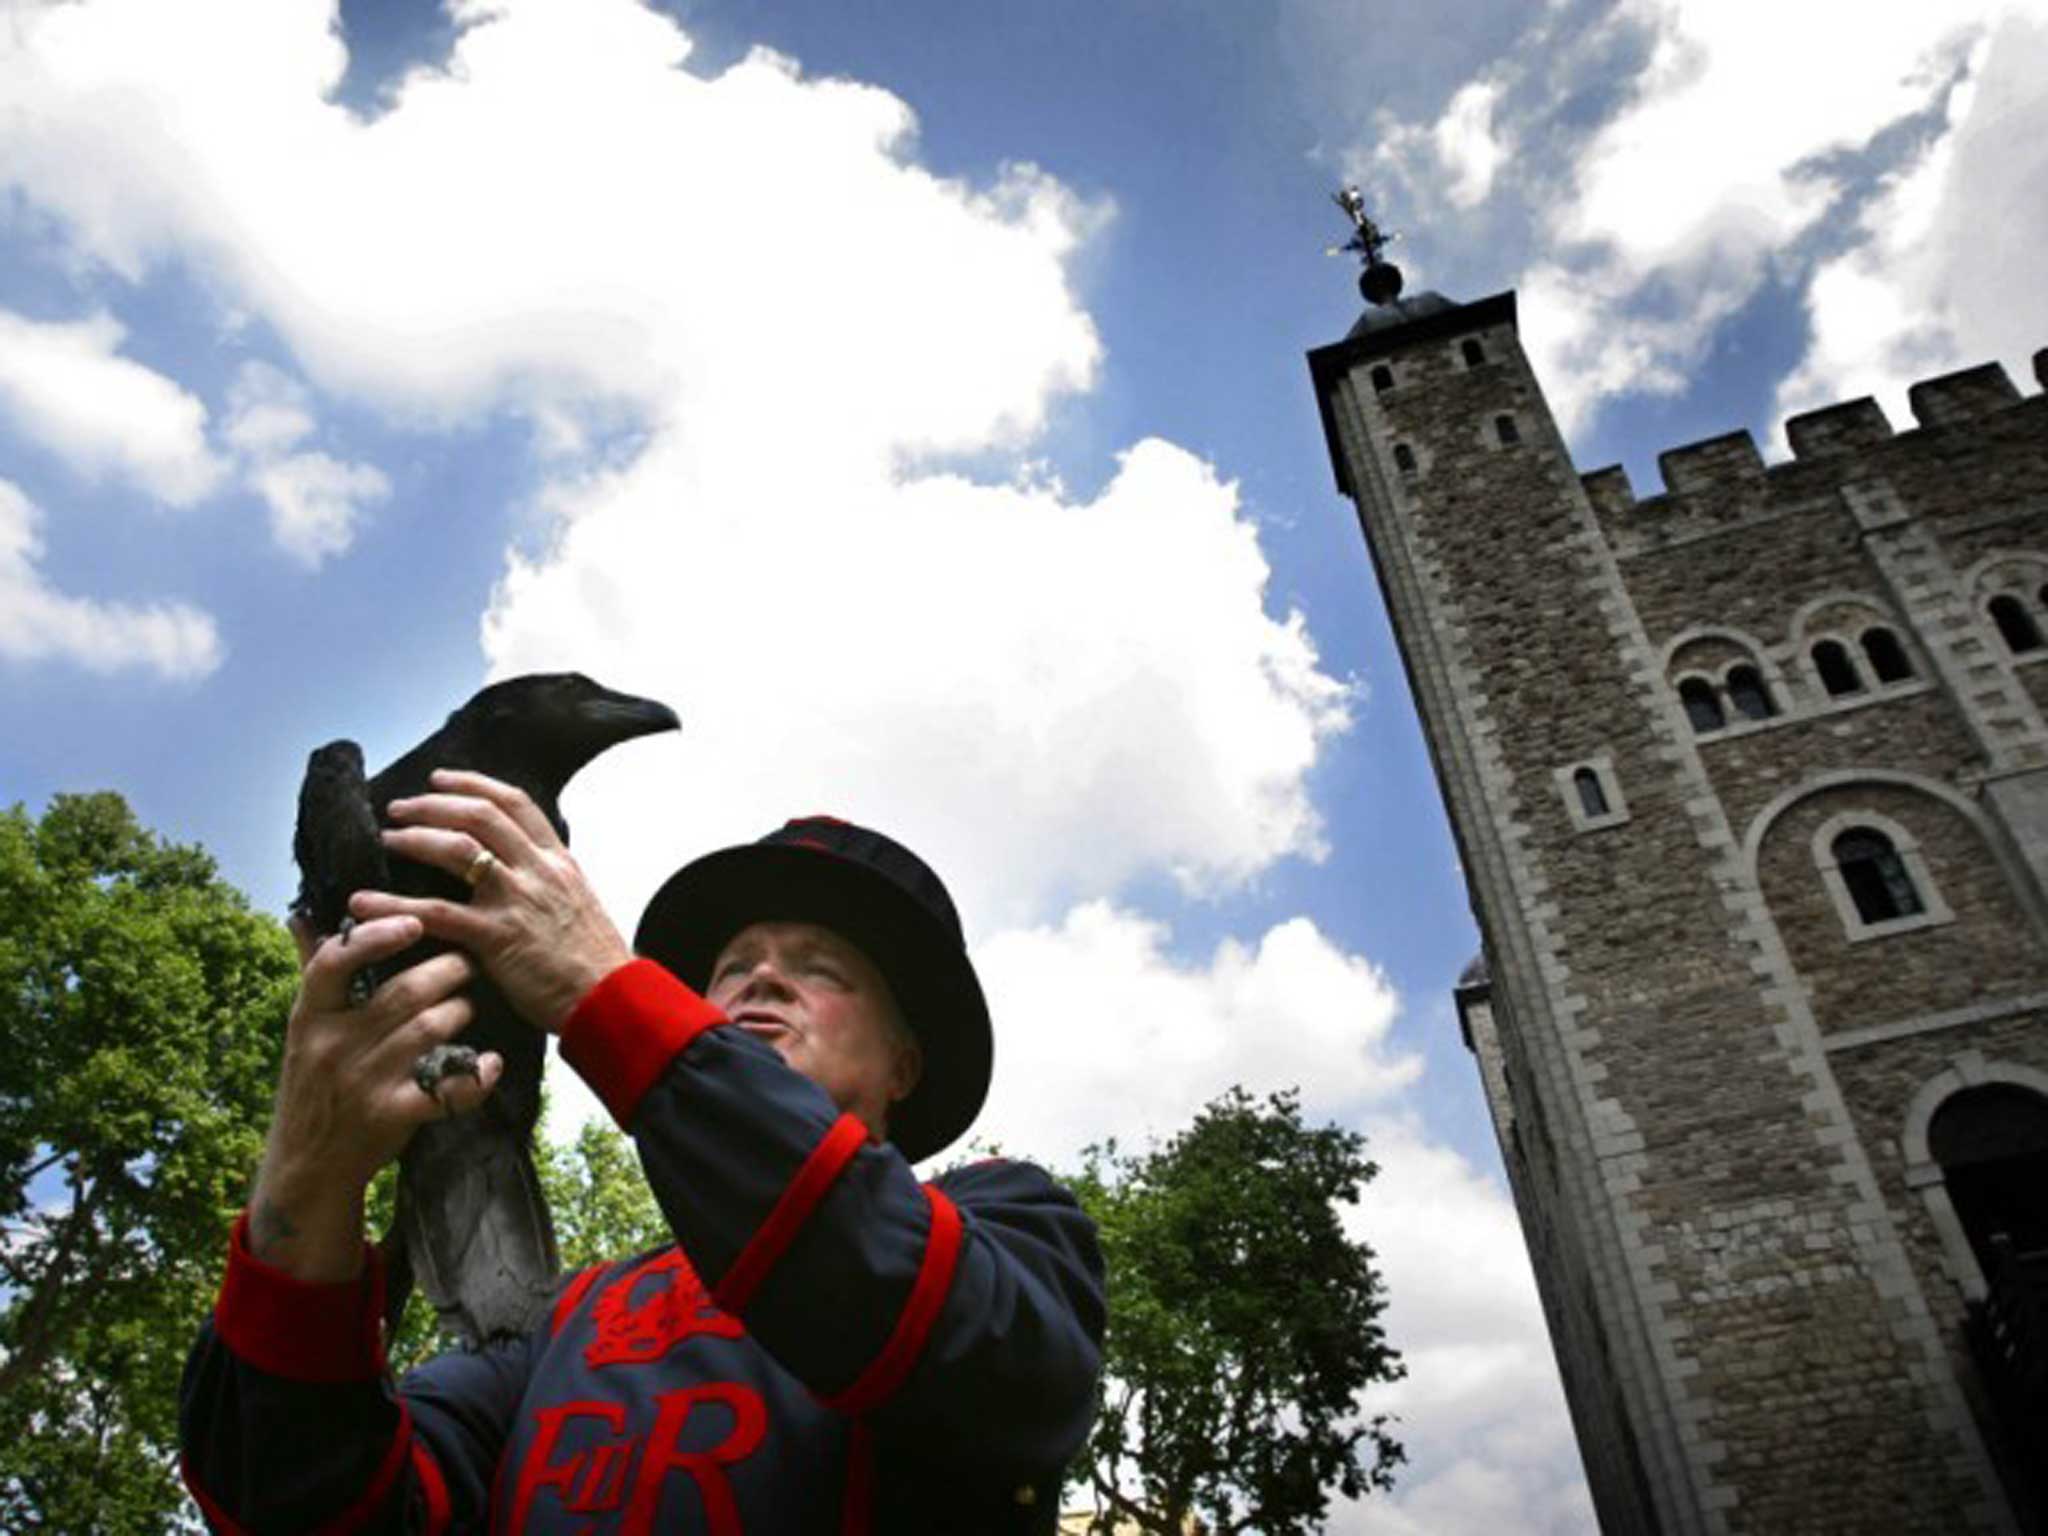 Watch the birdie: Ravens have been kept at the Tower for centuries